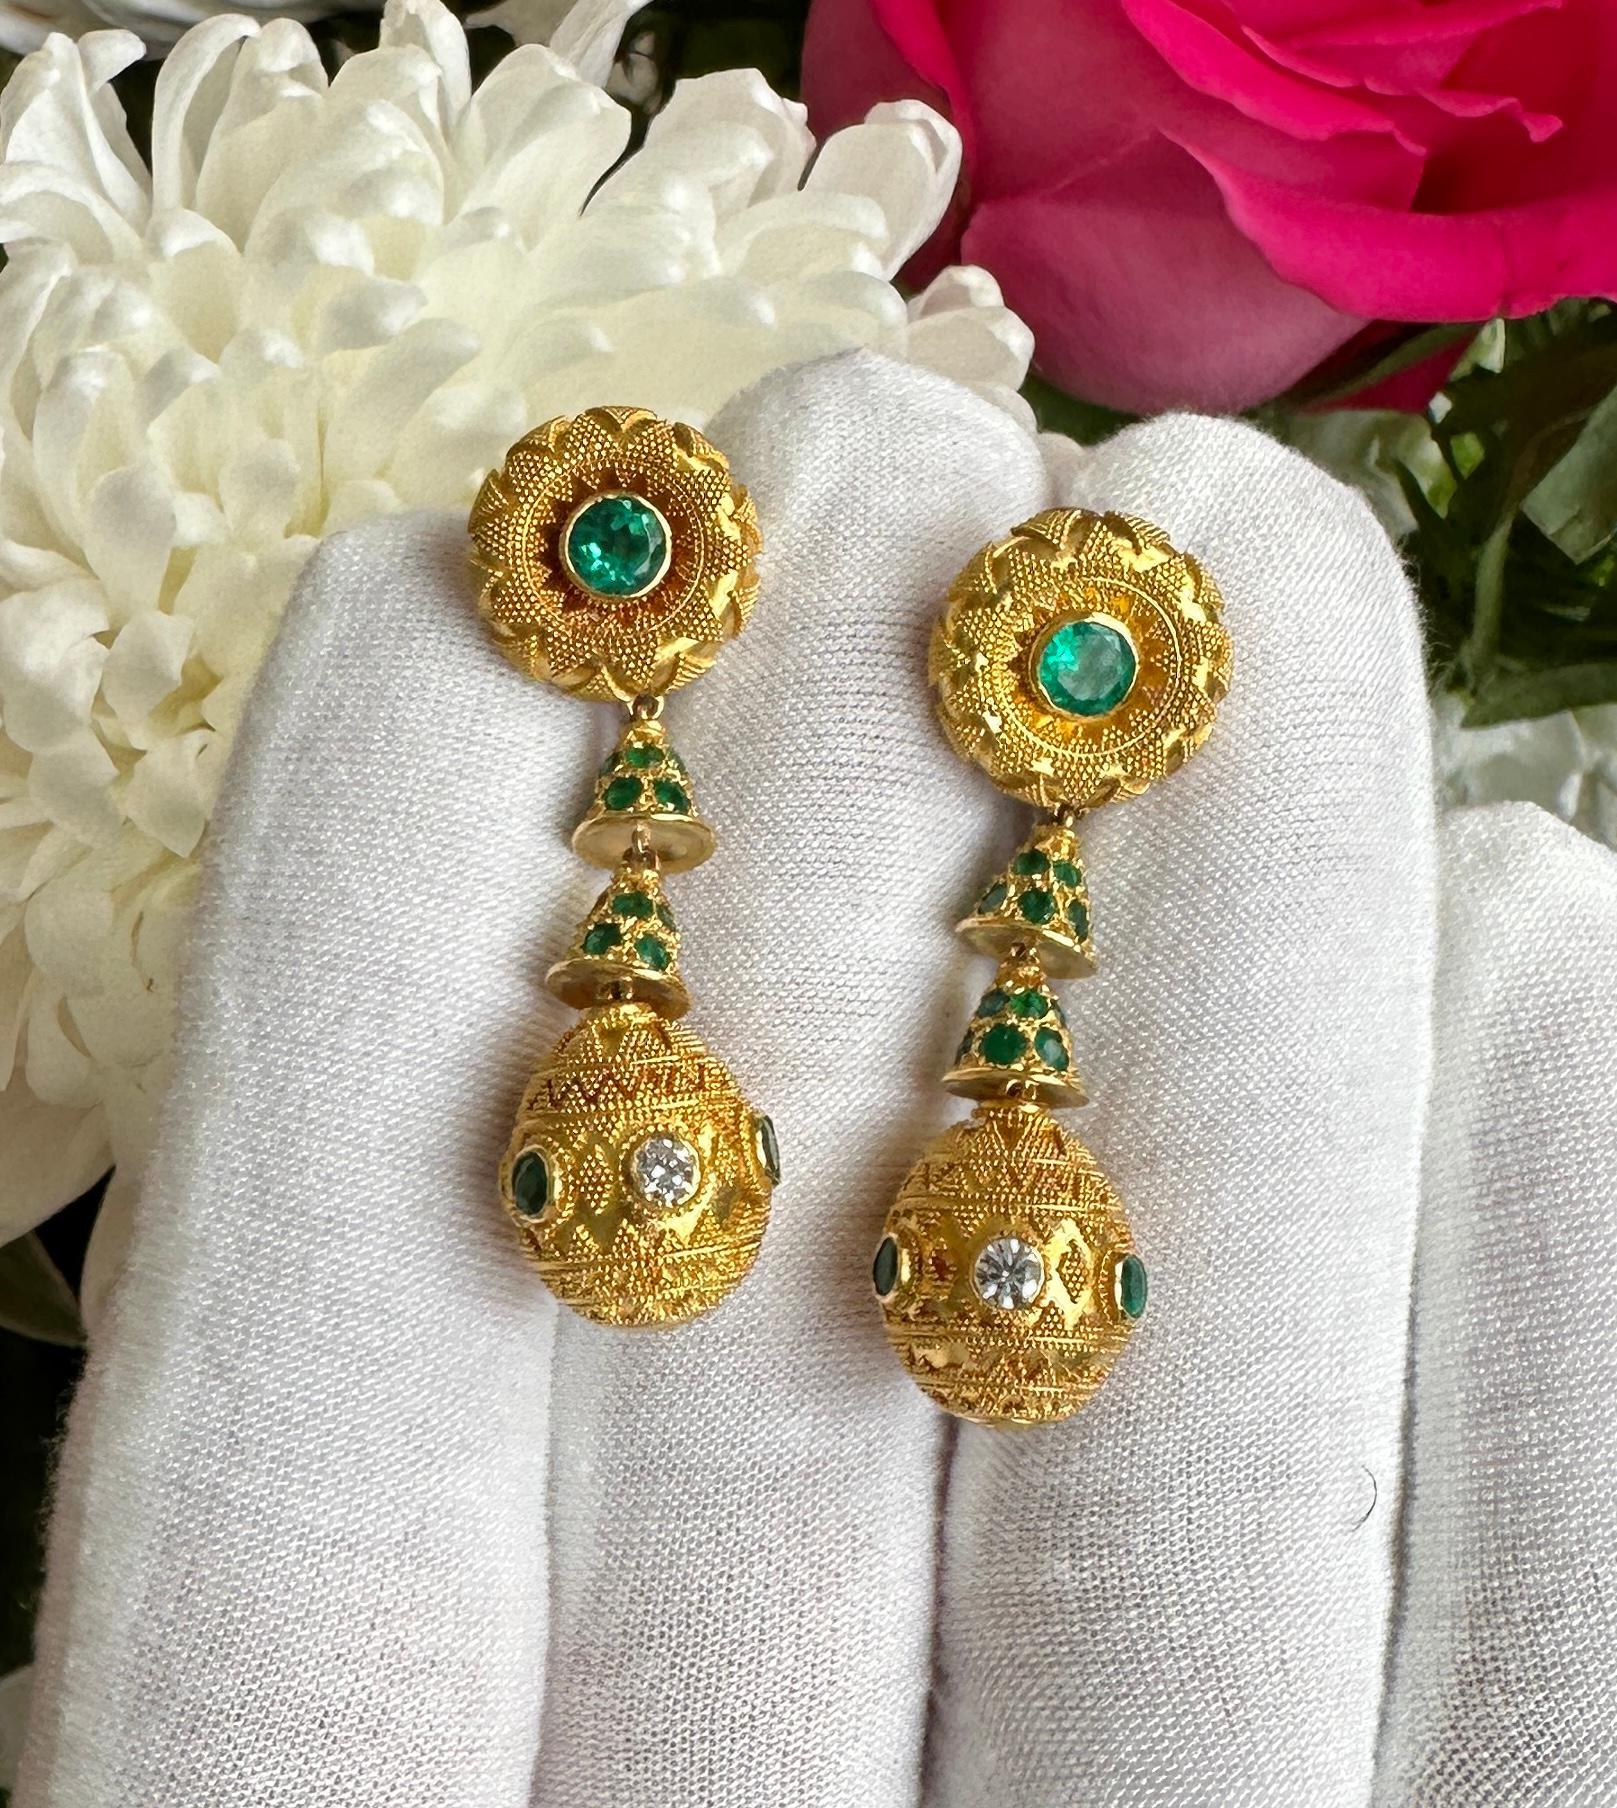 Emerald Diamond Earrings 22 Karat Gold 2 Inch Etruscan Dangle Drop Earrings In Excellent Condition For Sale In New York, NY